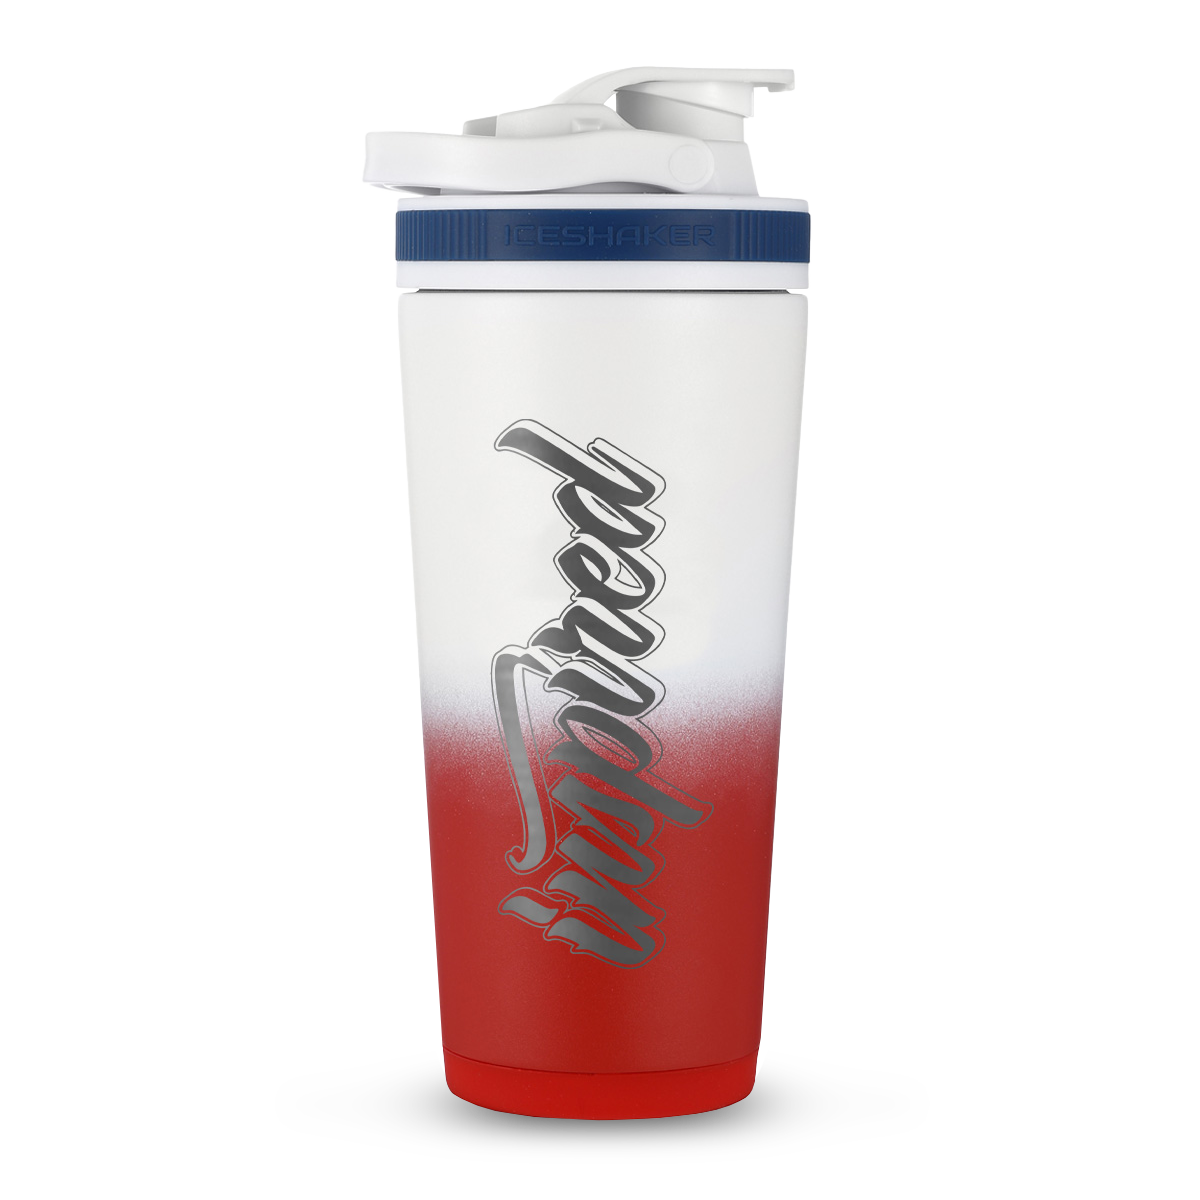 Inspired x Ice Shaker™ Collaborative Bottle – Inspired Nutraceuticals